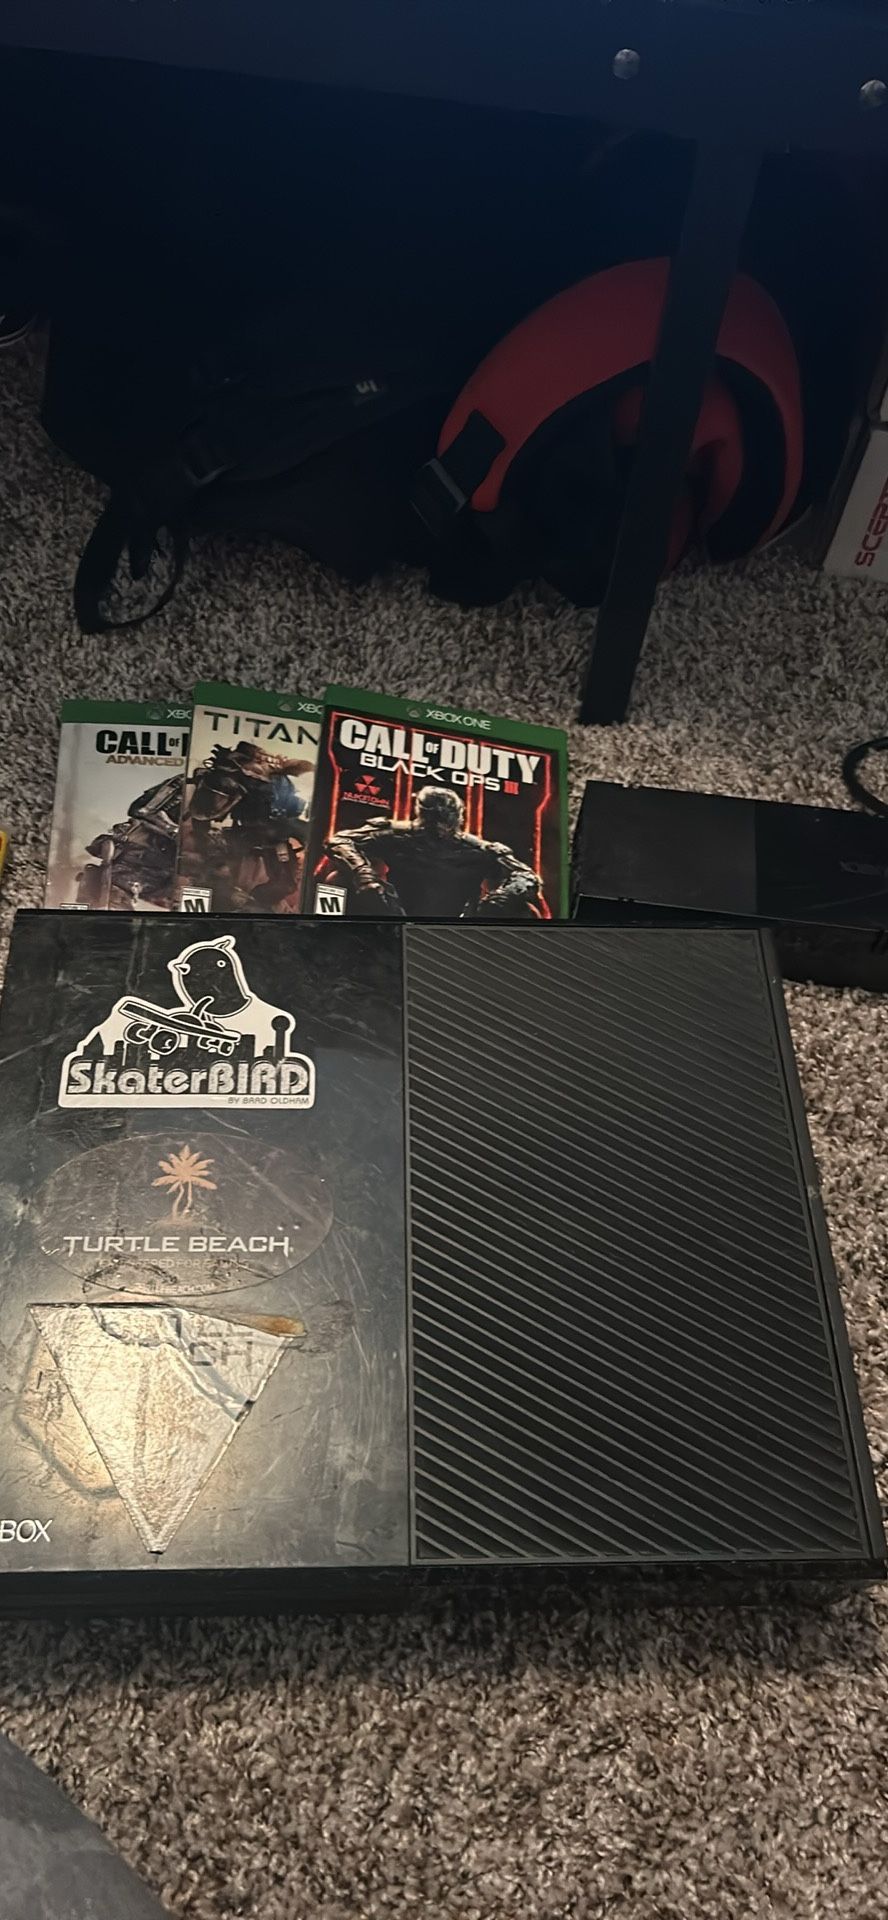 Xbox One With Games 